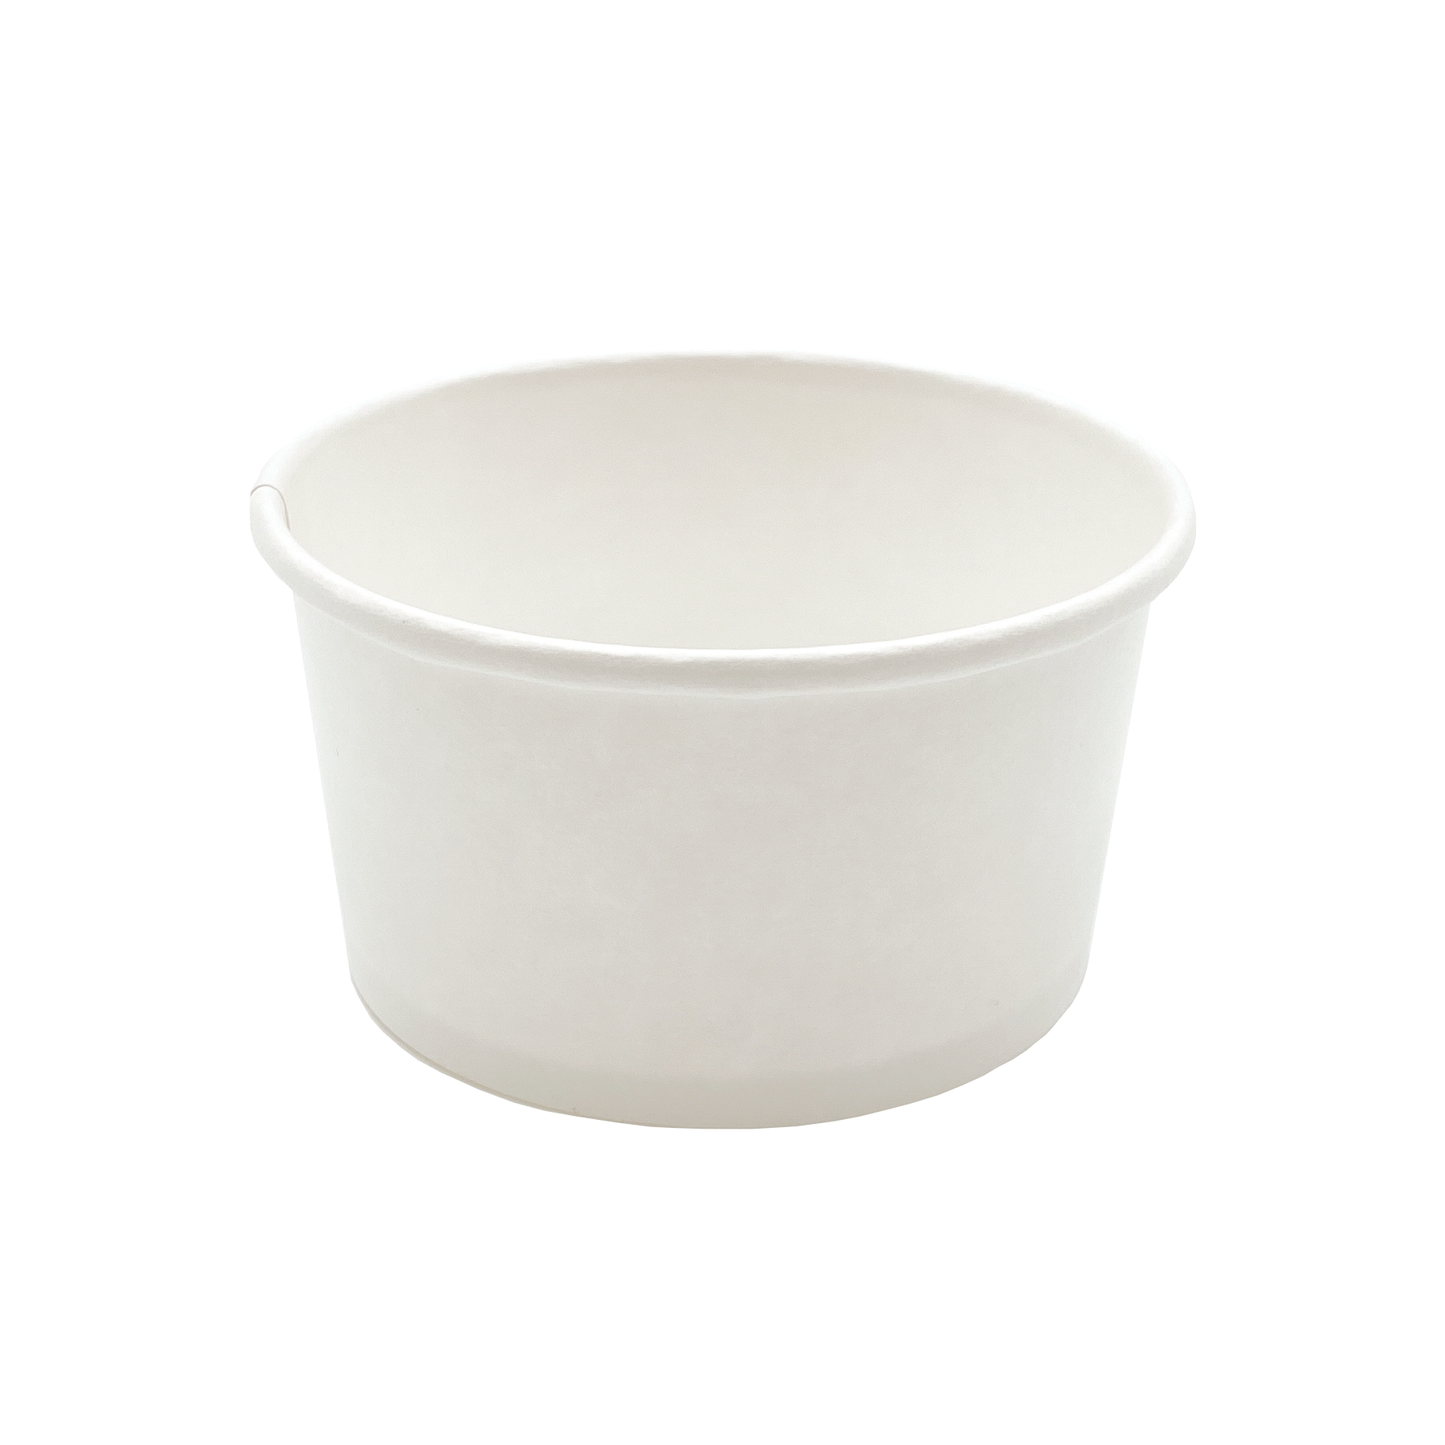 120-001-006 White Paper Soup/Food Container 6oz.